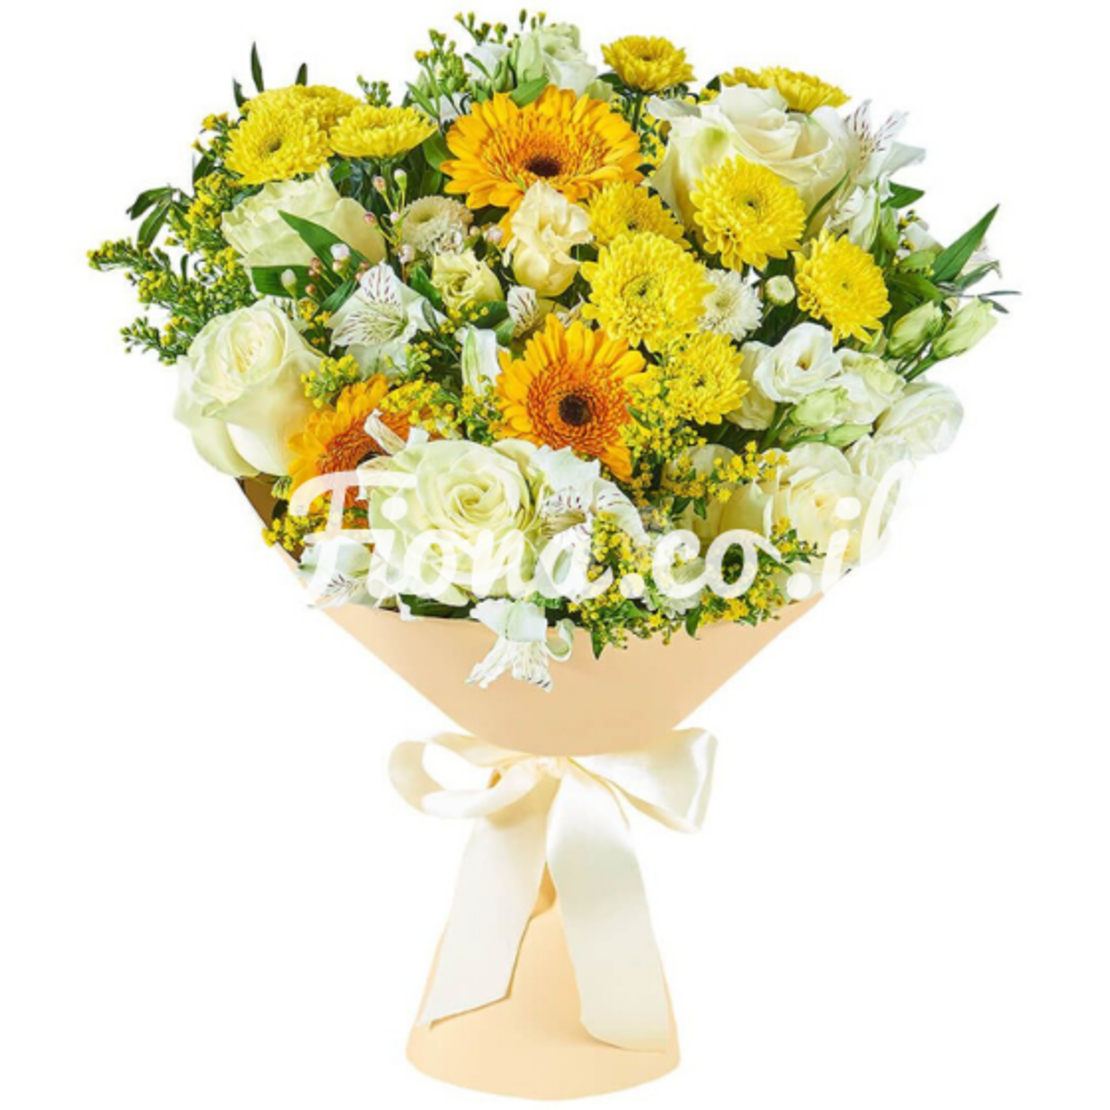 Bouquet of  Yellow Gerbera and Daisies  #112